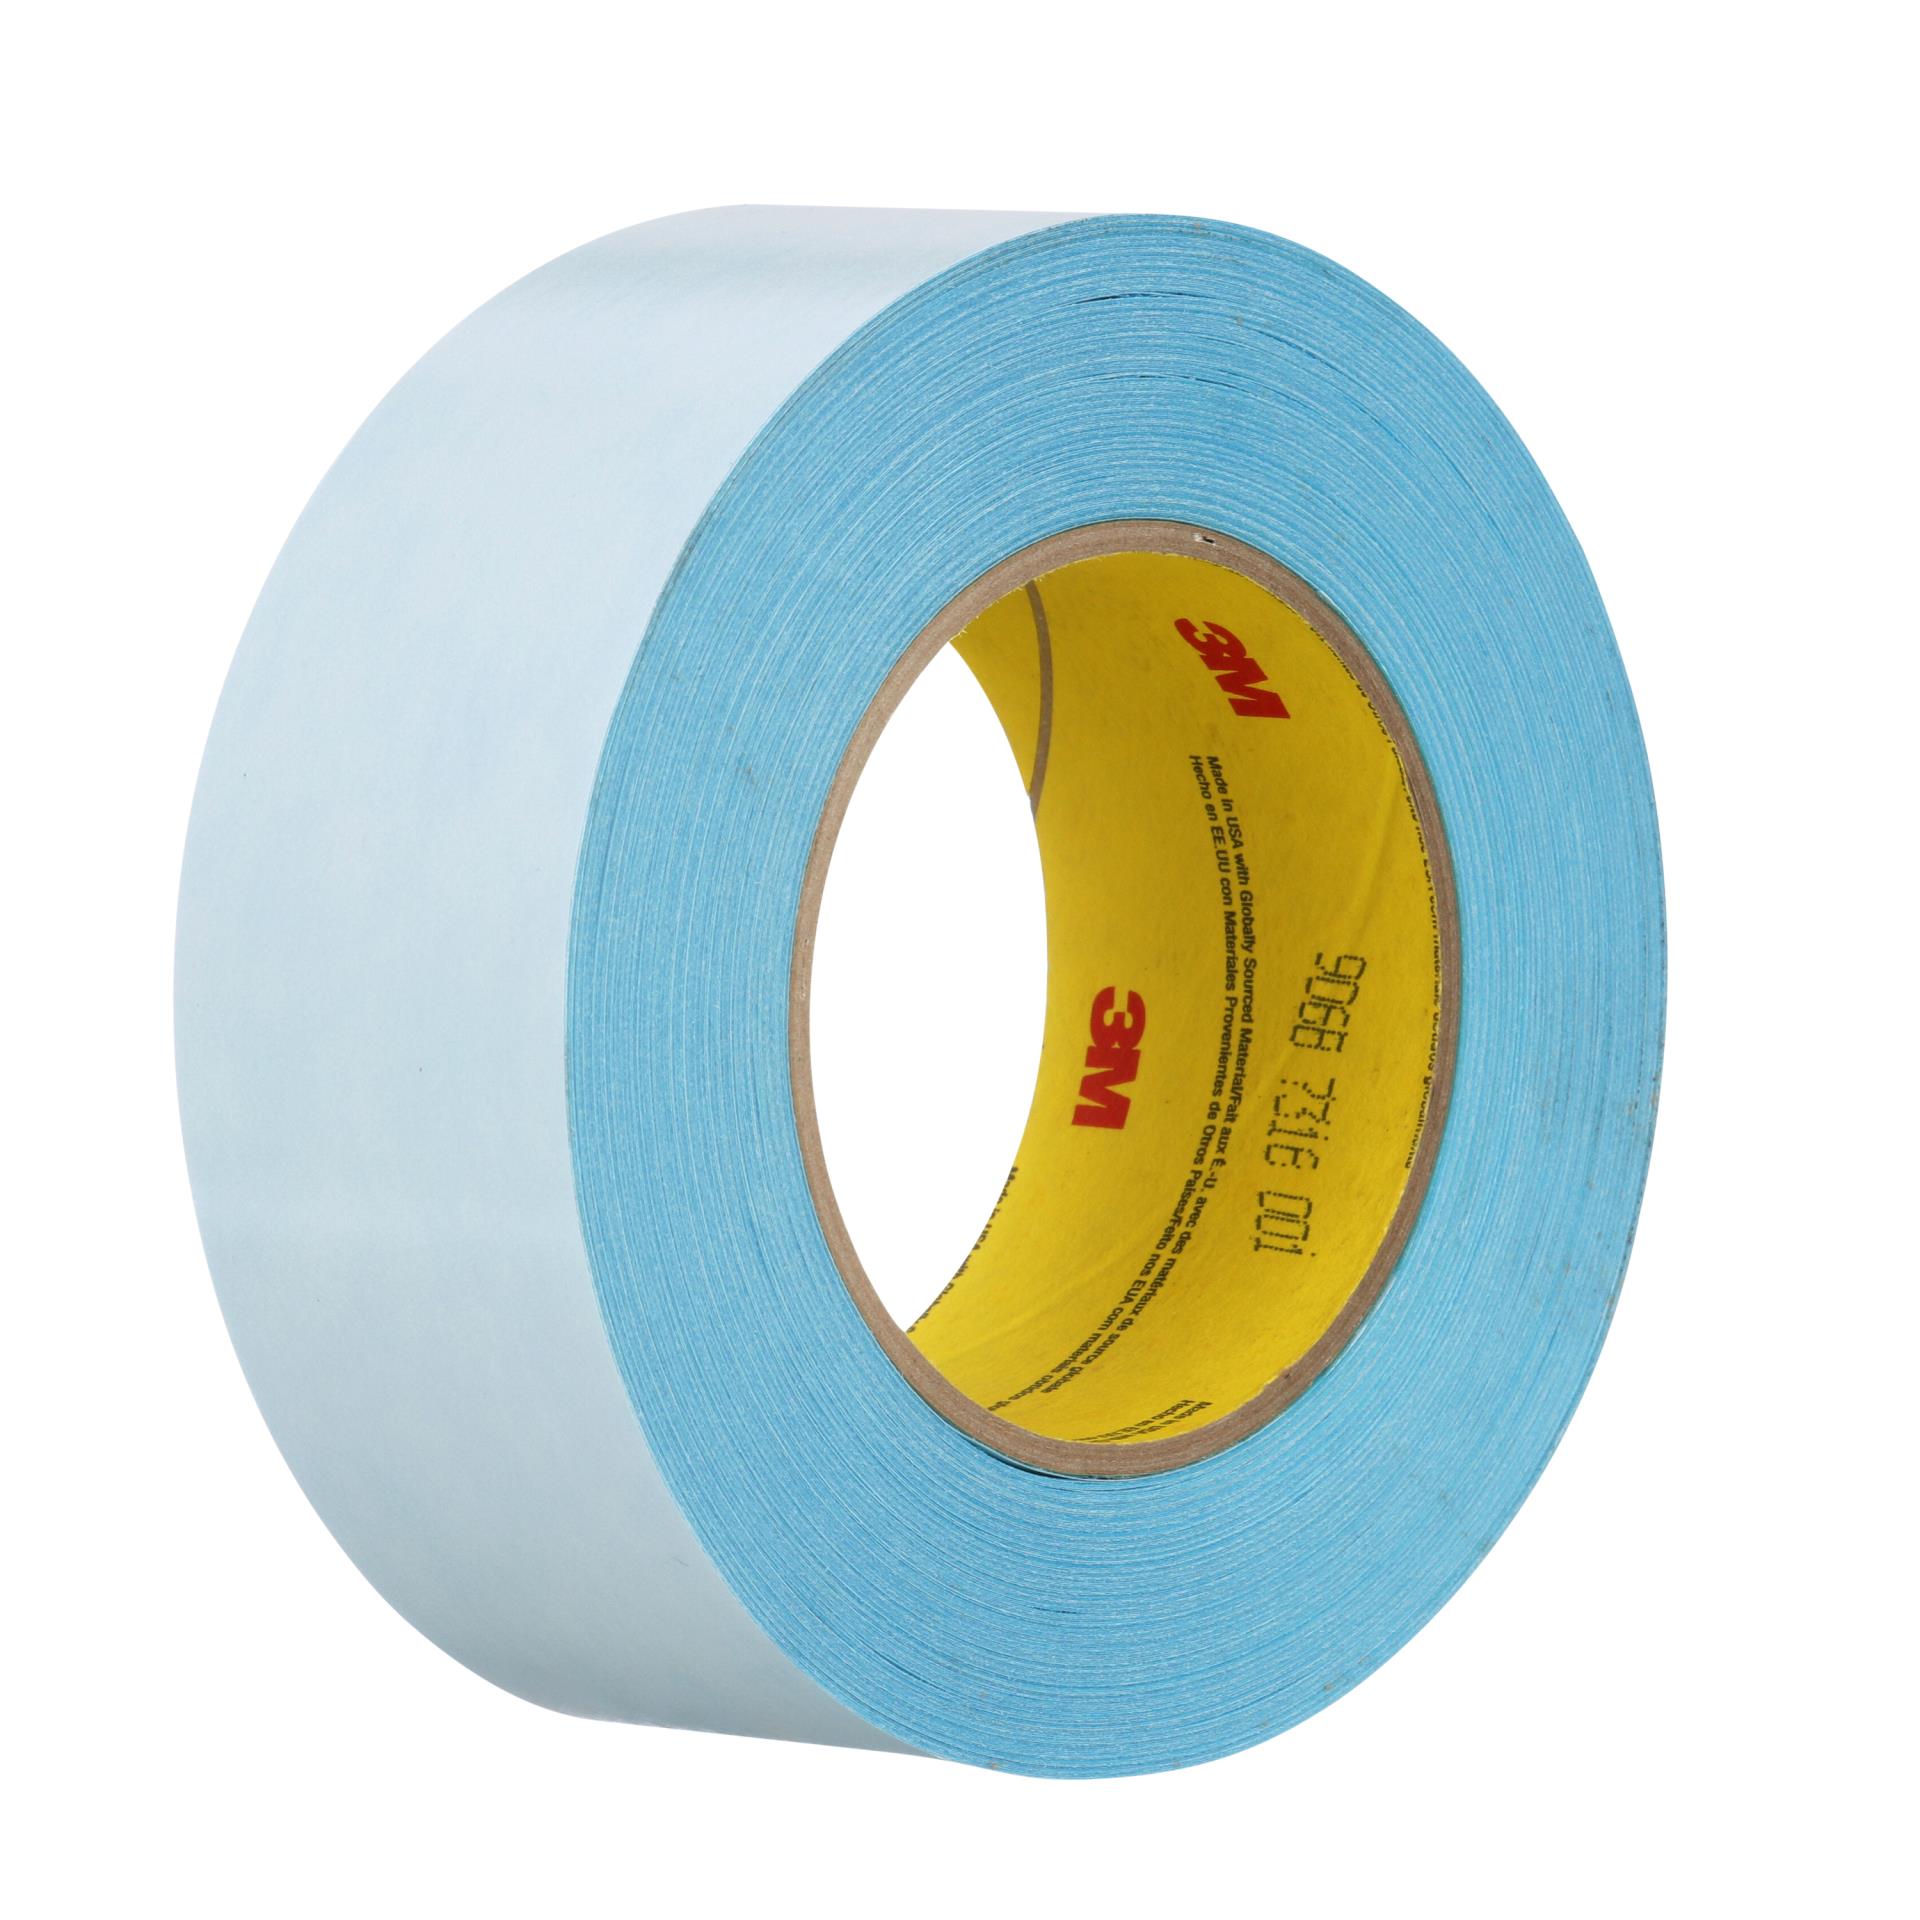 00051131175648 3M™ Repulpable Flying Splice Tape 906B, Blue, 36 mm x 55  m, mil, 24 rolls per case Aircraft products splicing--tabbing-tapes  6300241